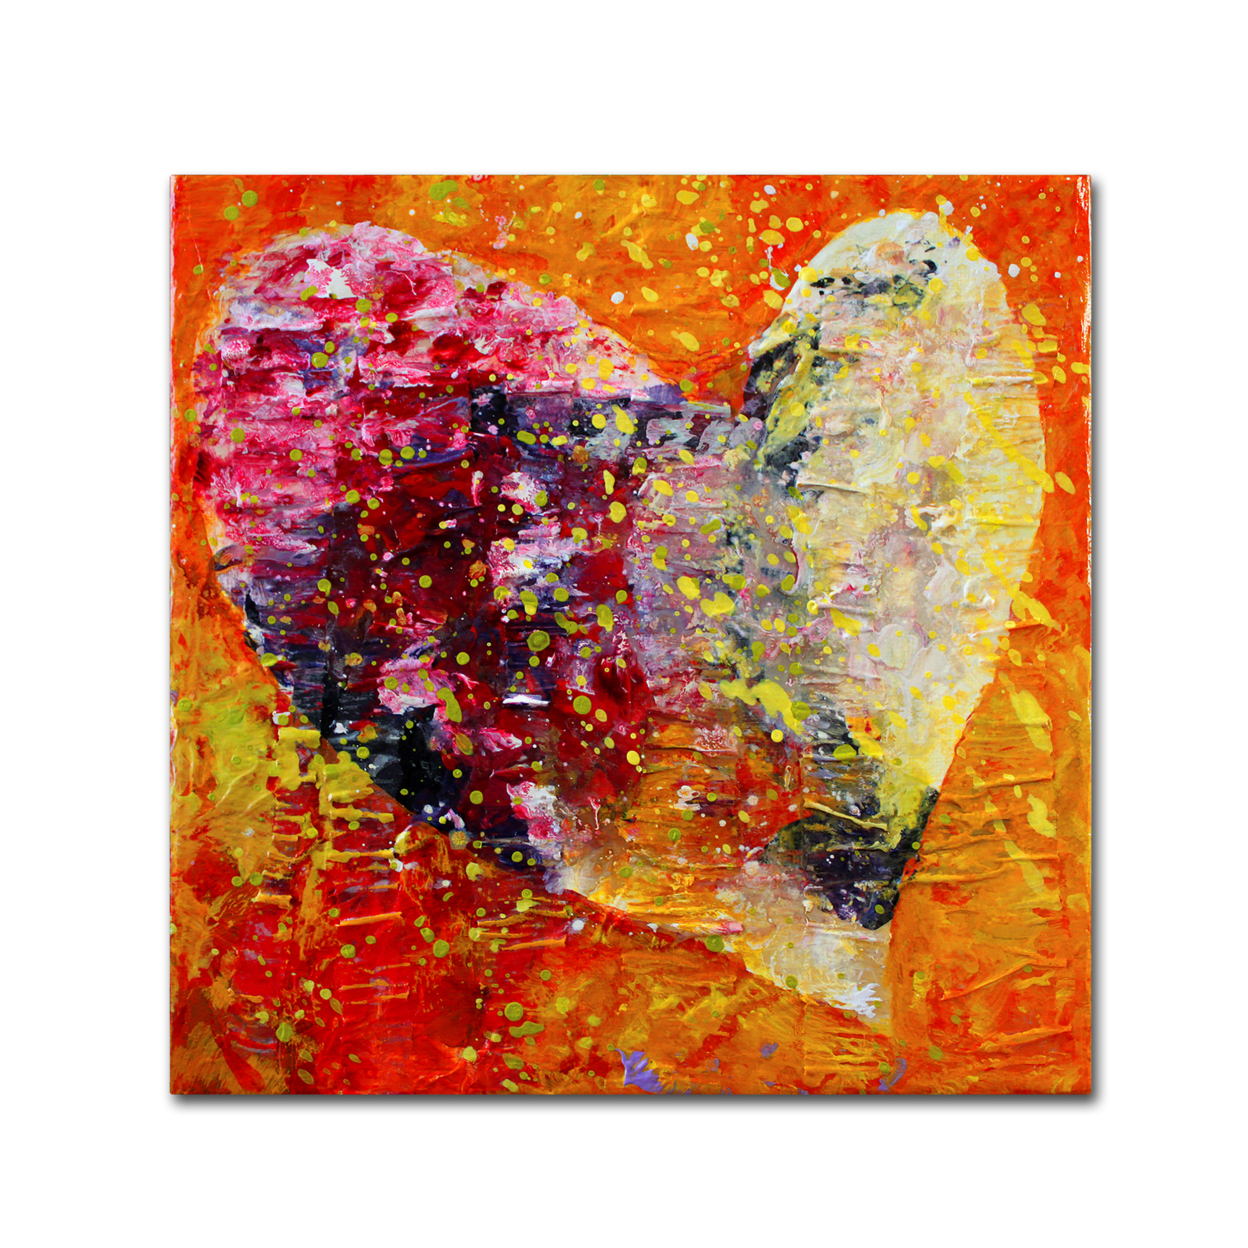 Marion Rose 'Heart' Ready To Hang Canvas Art 18 X 18 Inches Made In USA